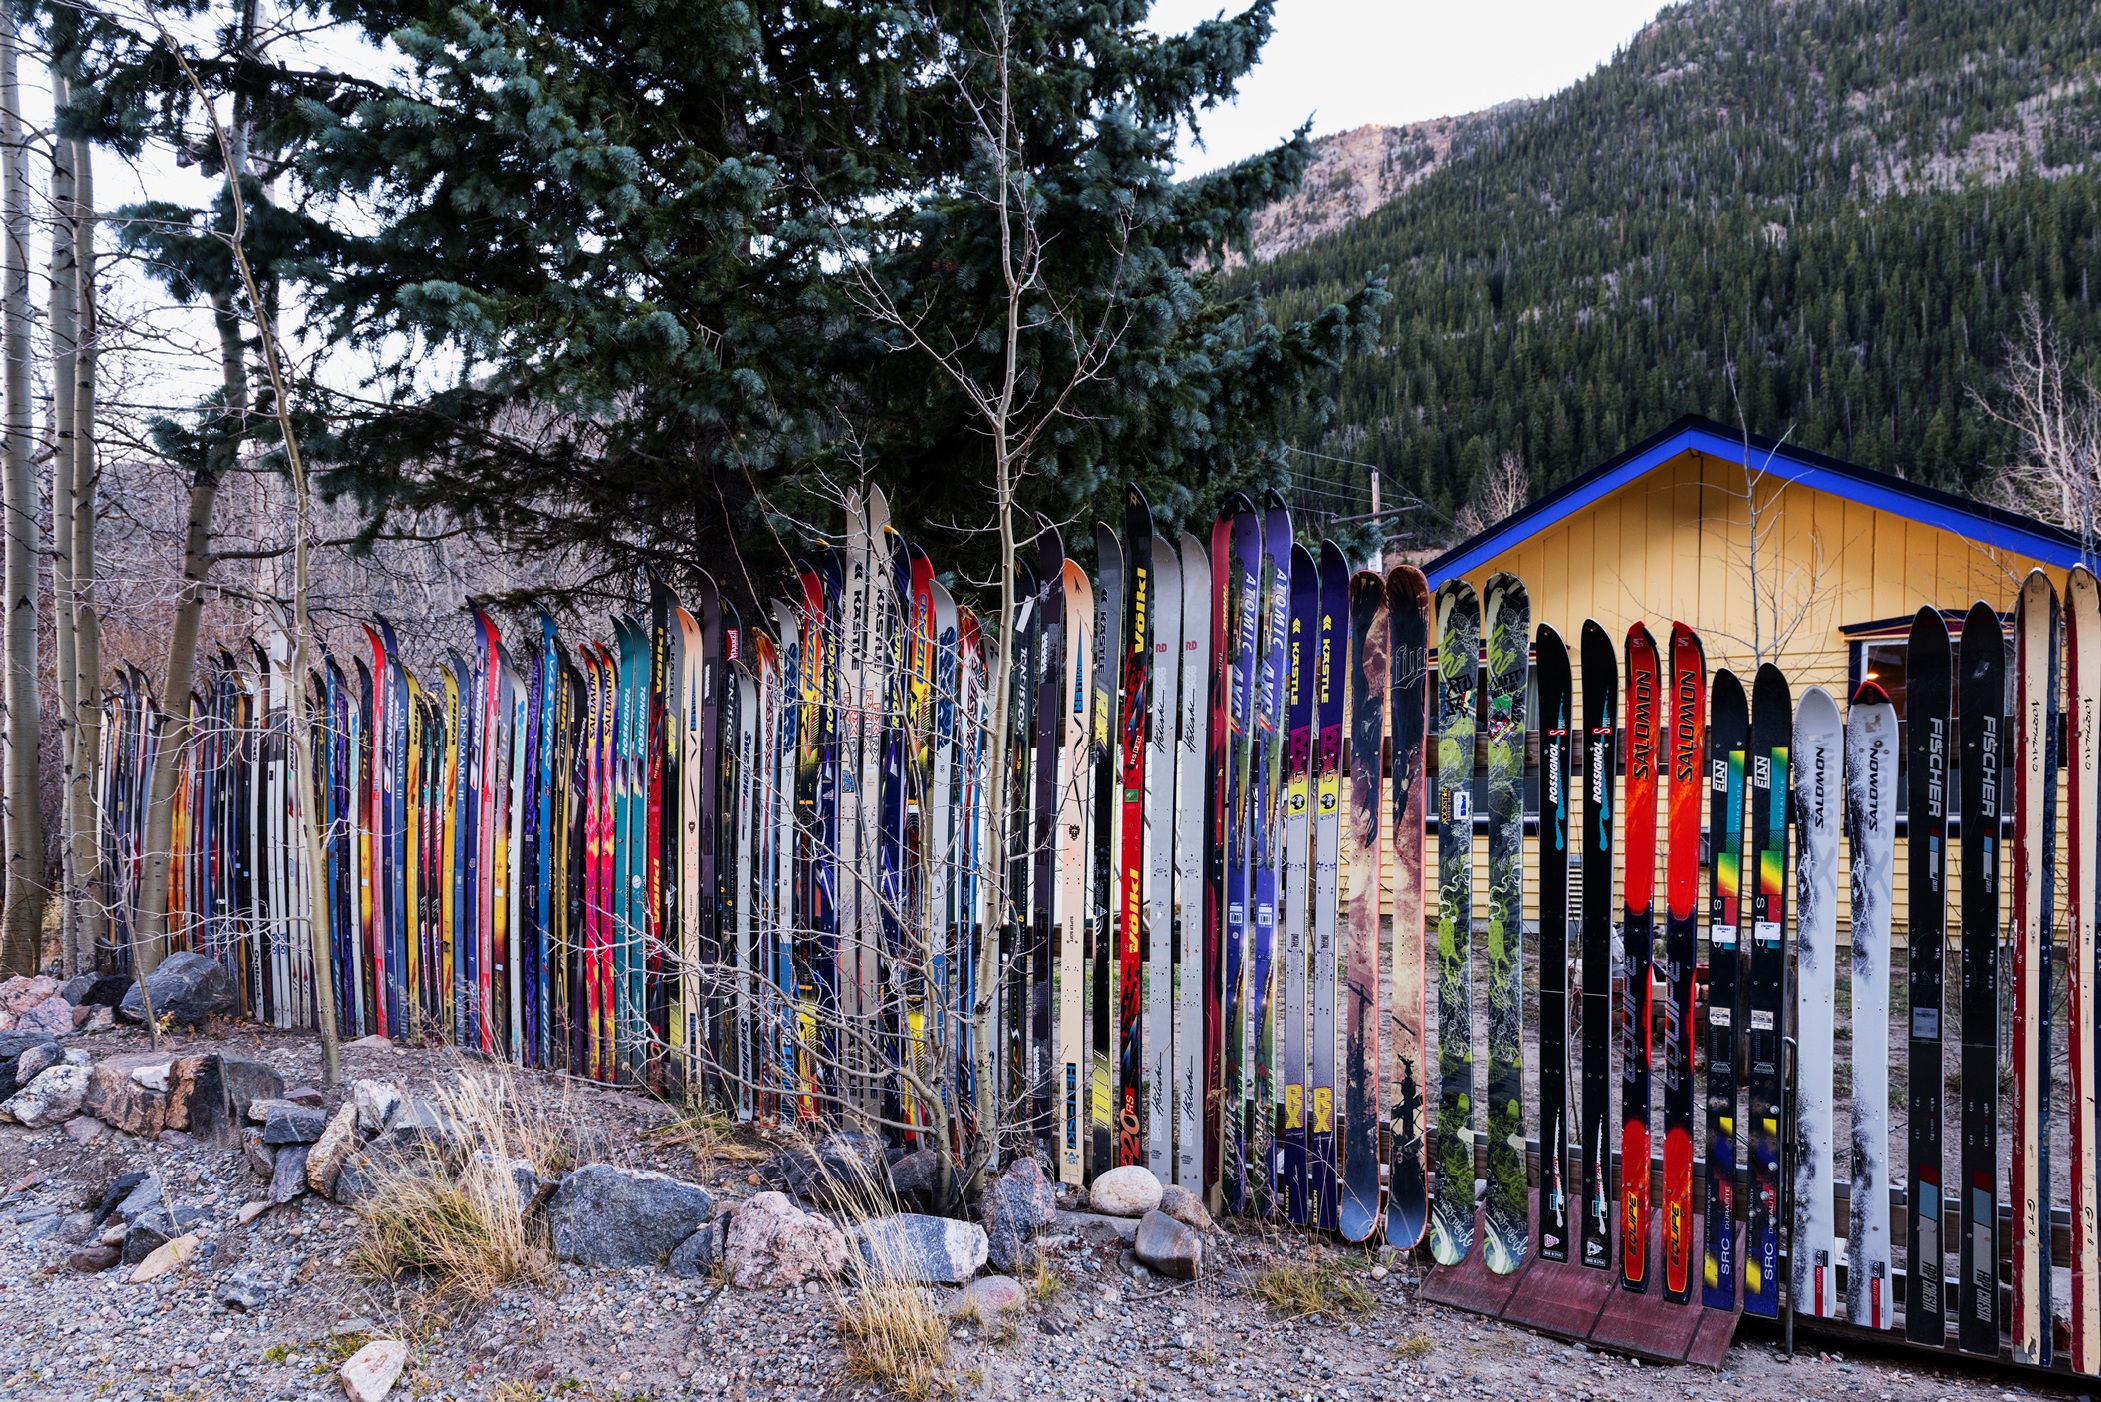 Skis on a fence in Idaho Springs Colorado by 12019